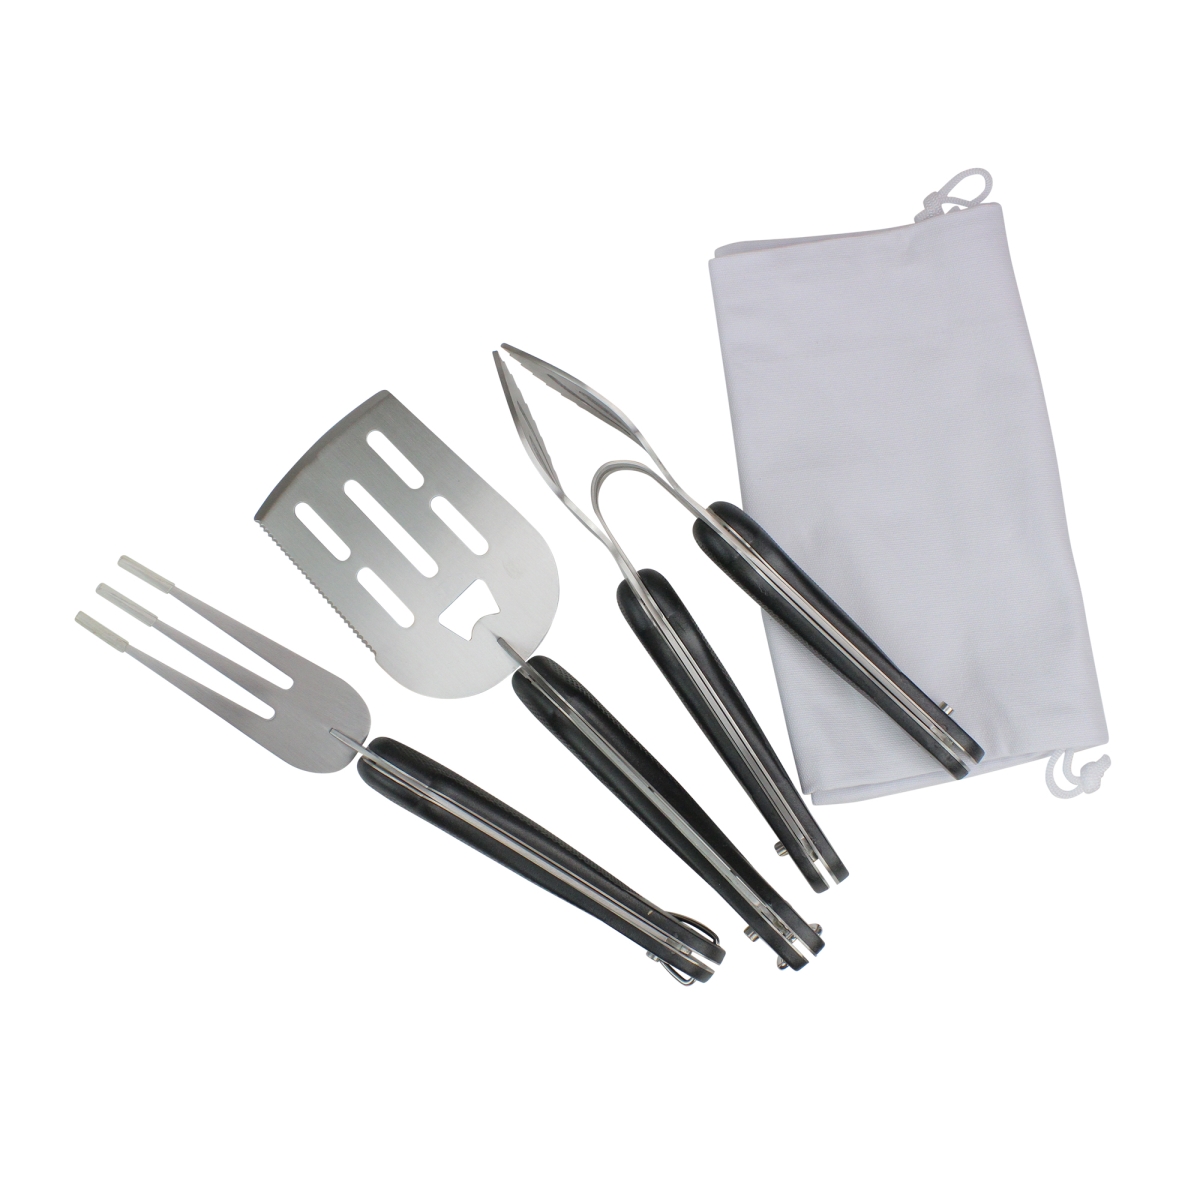 Picture of Avon 33537512 18 in. Folding BBQ Tool Set - Black & Silver - Set of 3